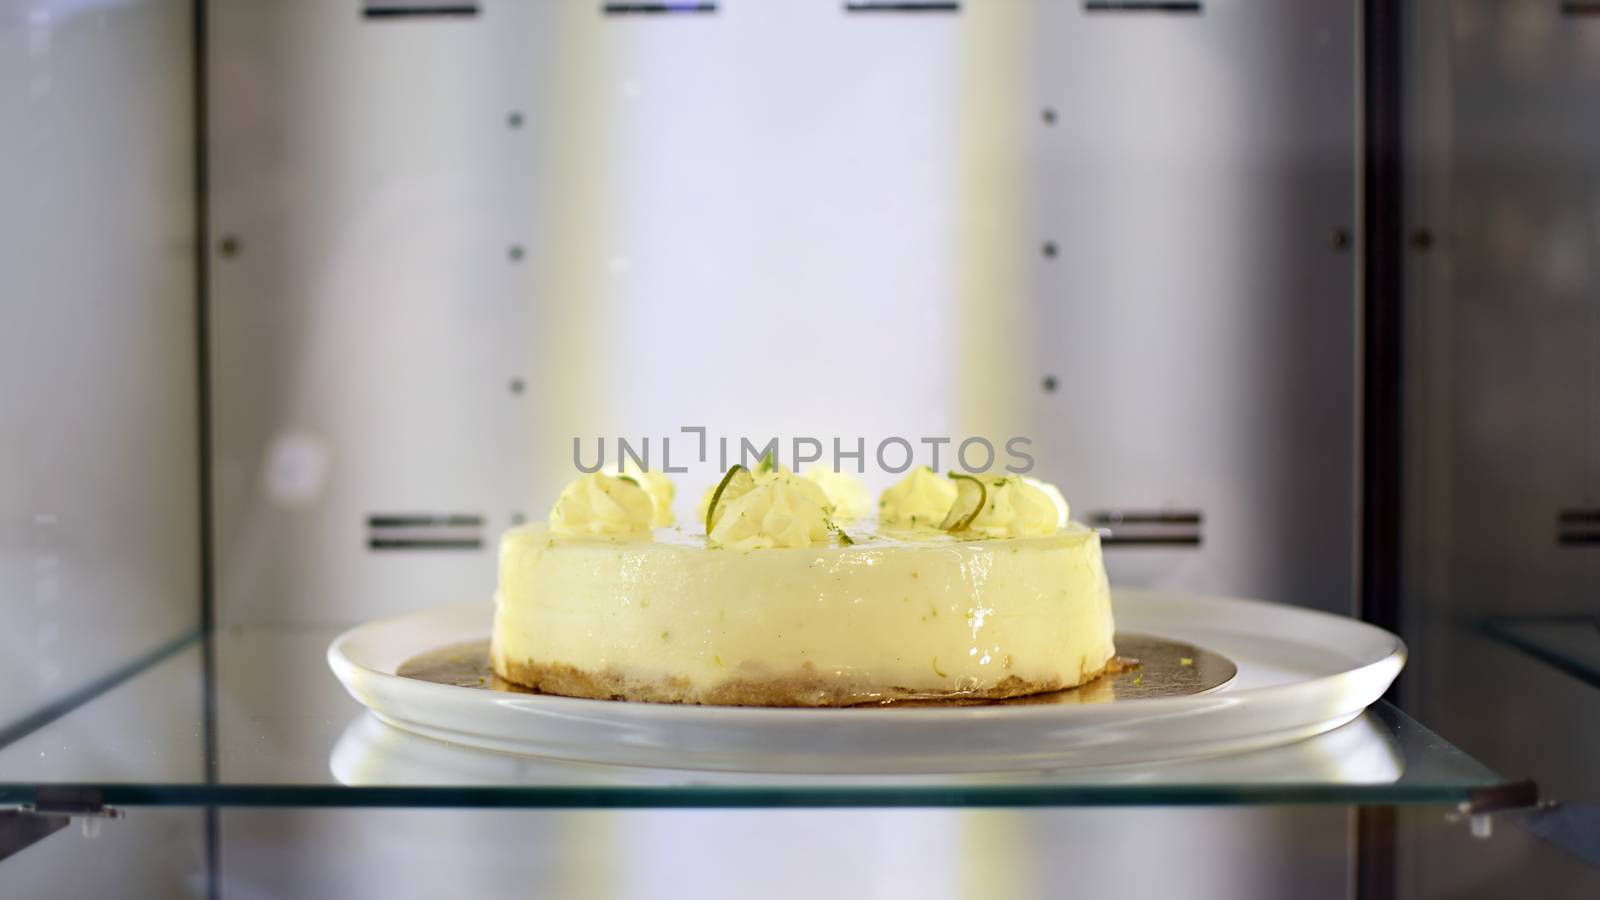 Delicious cheese-cake with whipped cream at bakery display by worledit